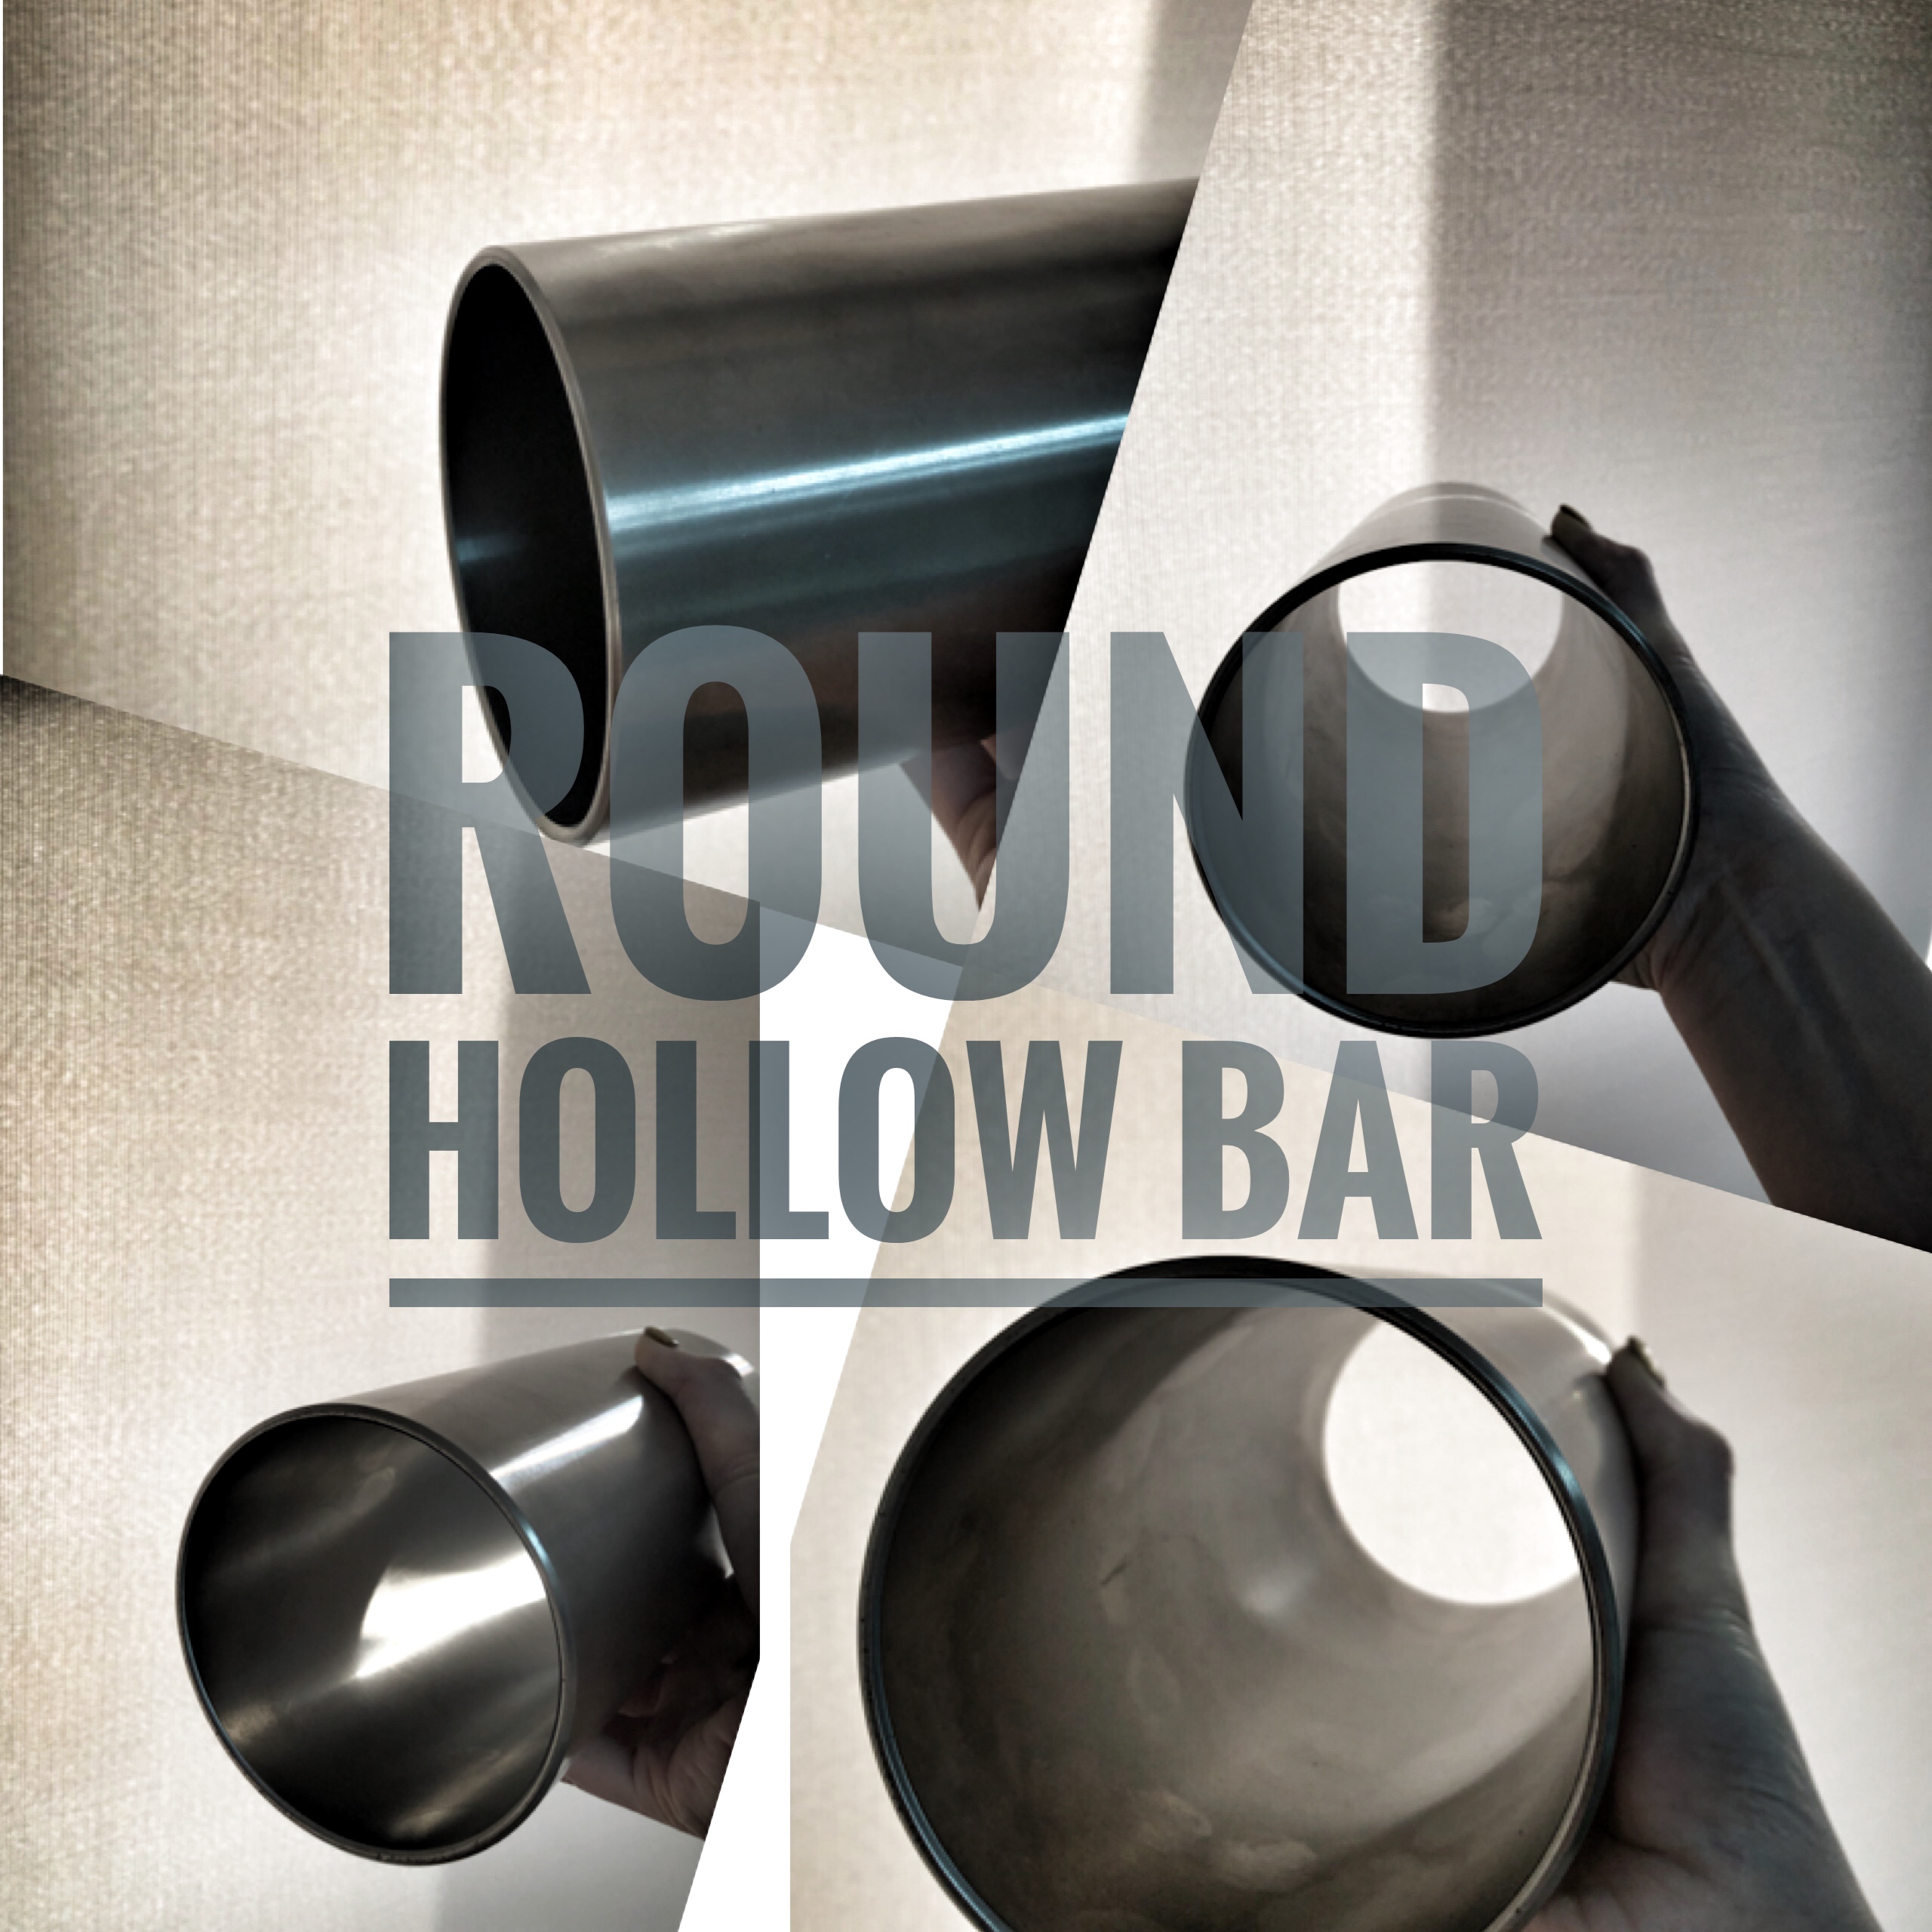 Round hollow bar is the another name of centrifugal casting